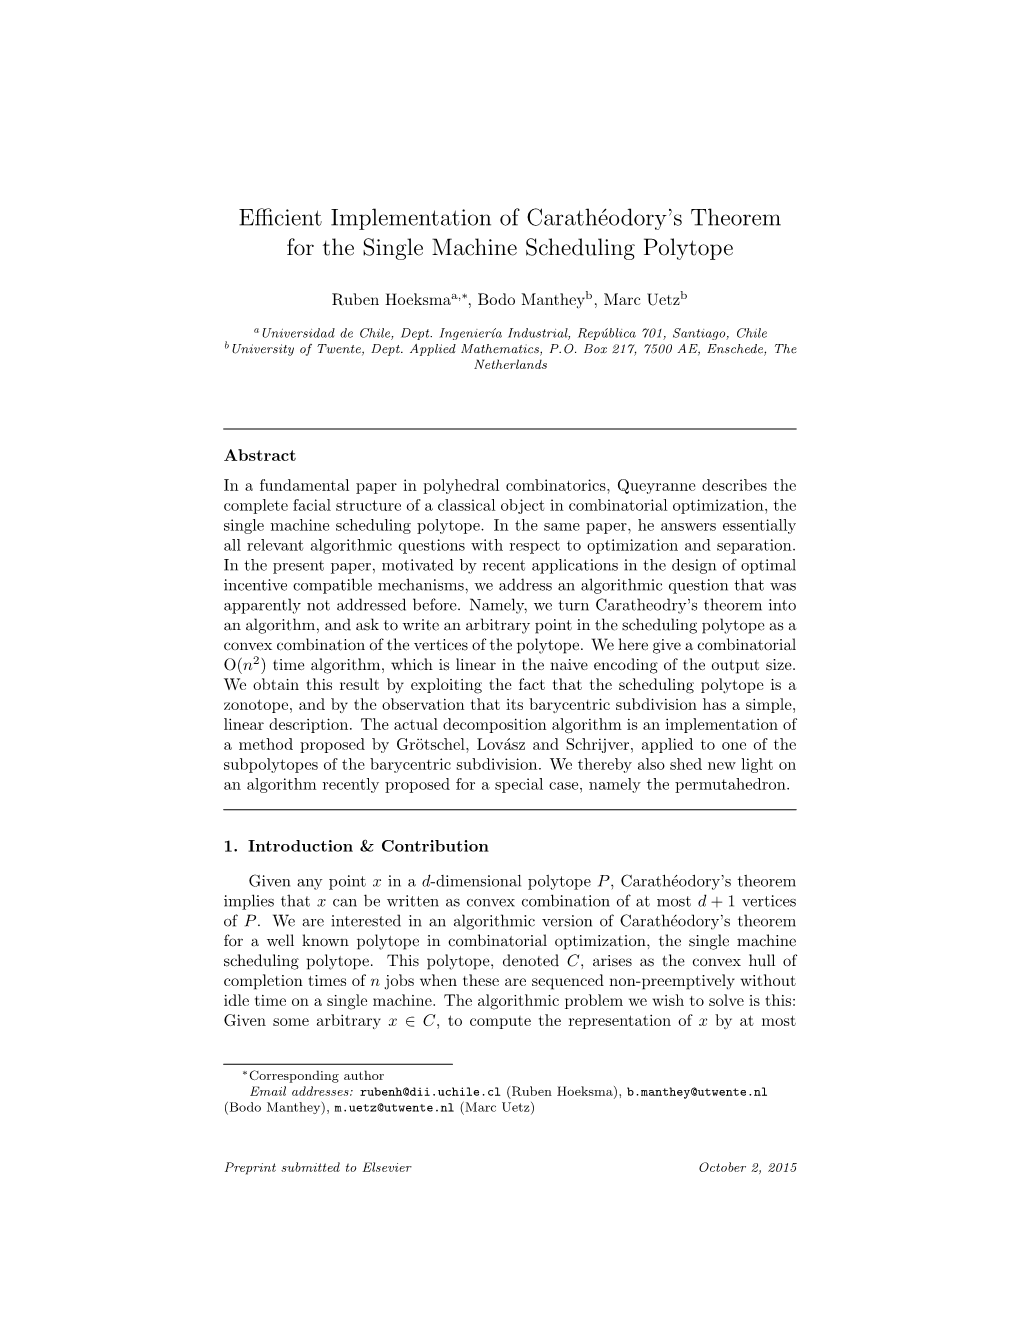 Efficient Implementation of Carathéodory's Theorem for the Single Machine Scheduling Polytope